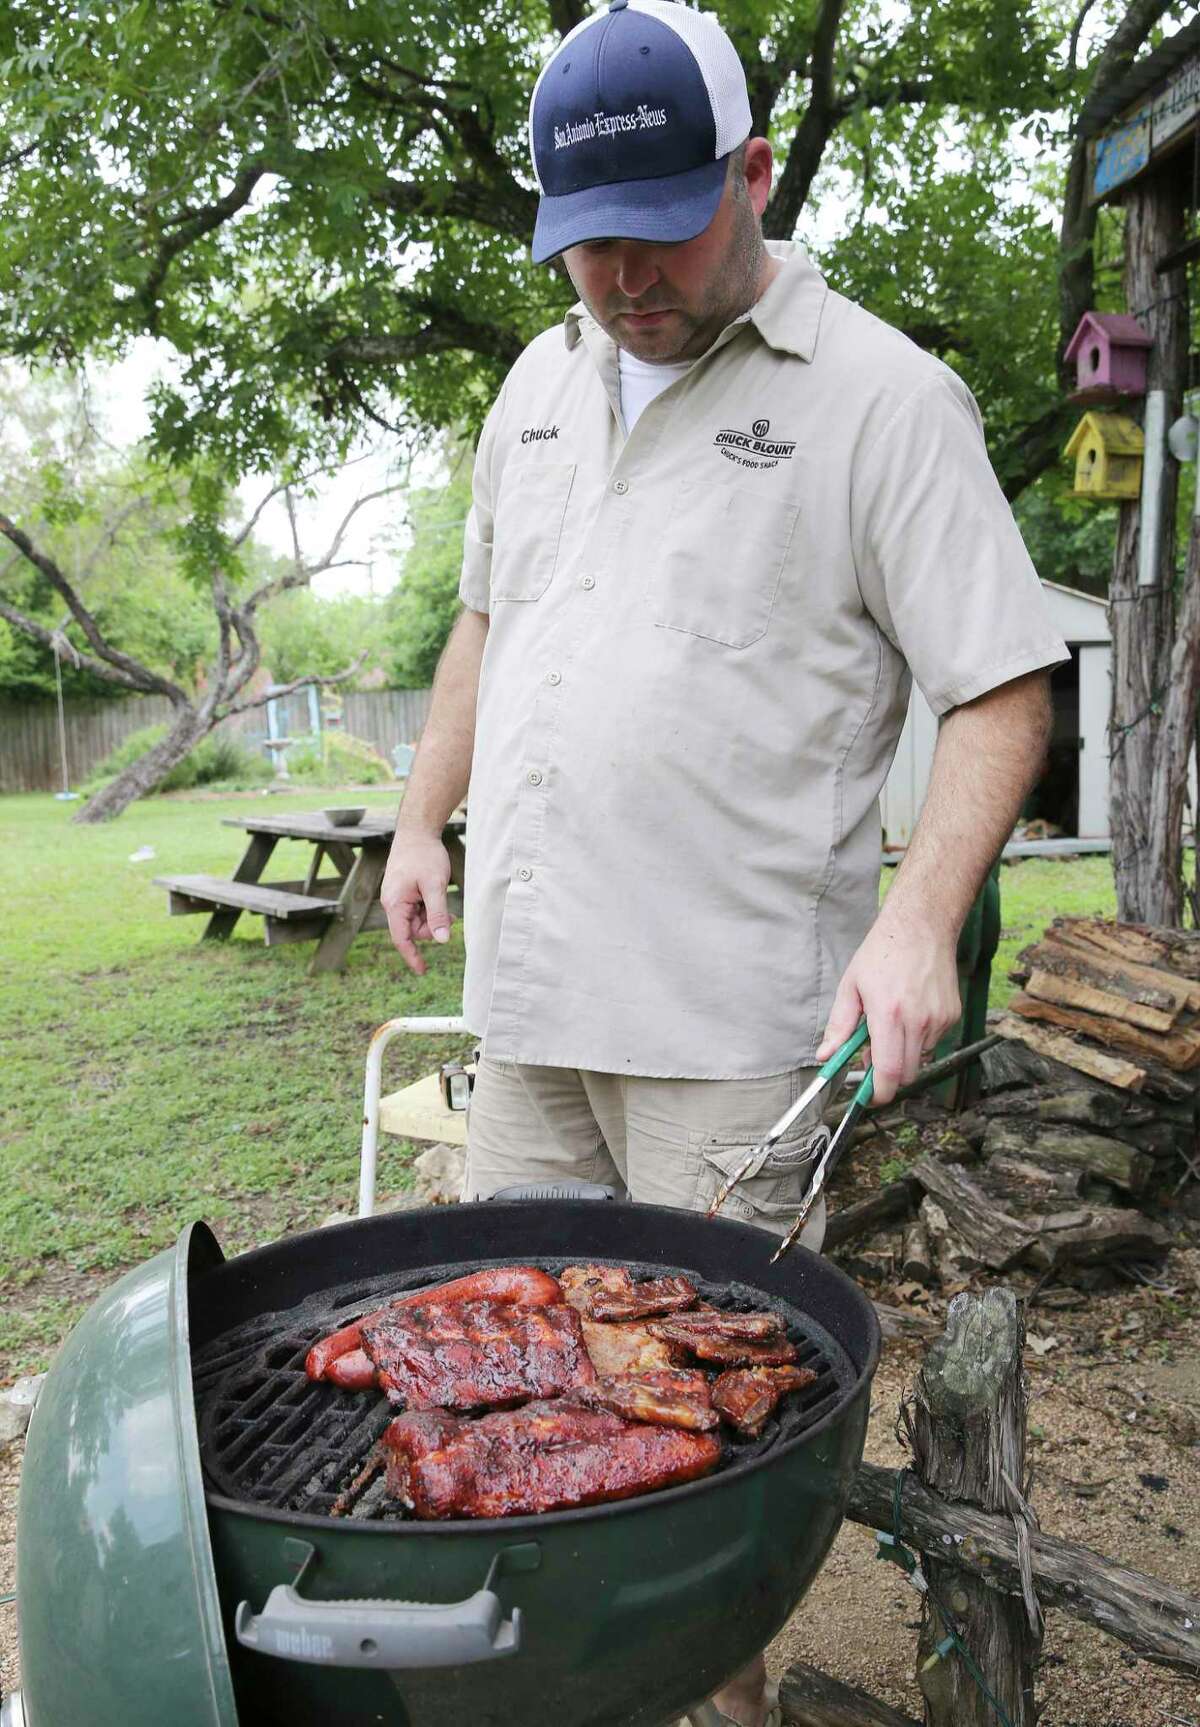 Chuck Blount turns meats over on the grill after applying layers of the barbecue sauces that he recommends.